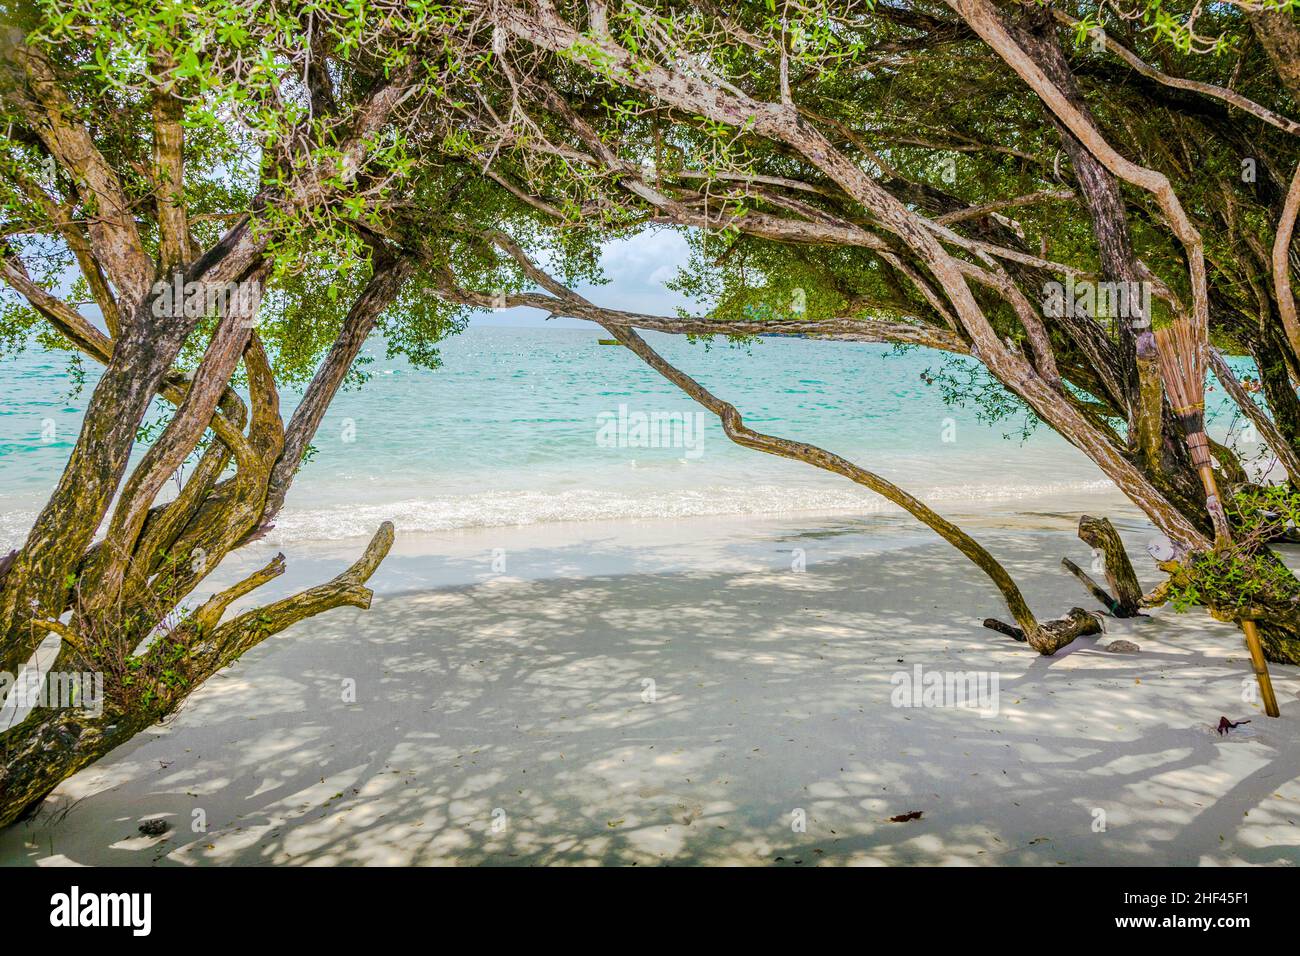 tropical beach in Koh Samet, Thailand with trees Stock Photo